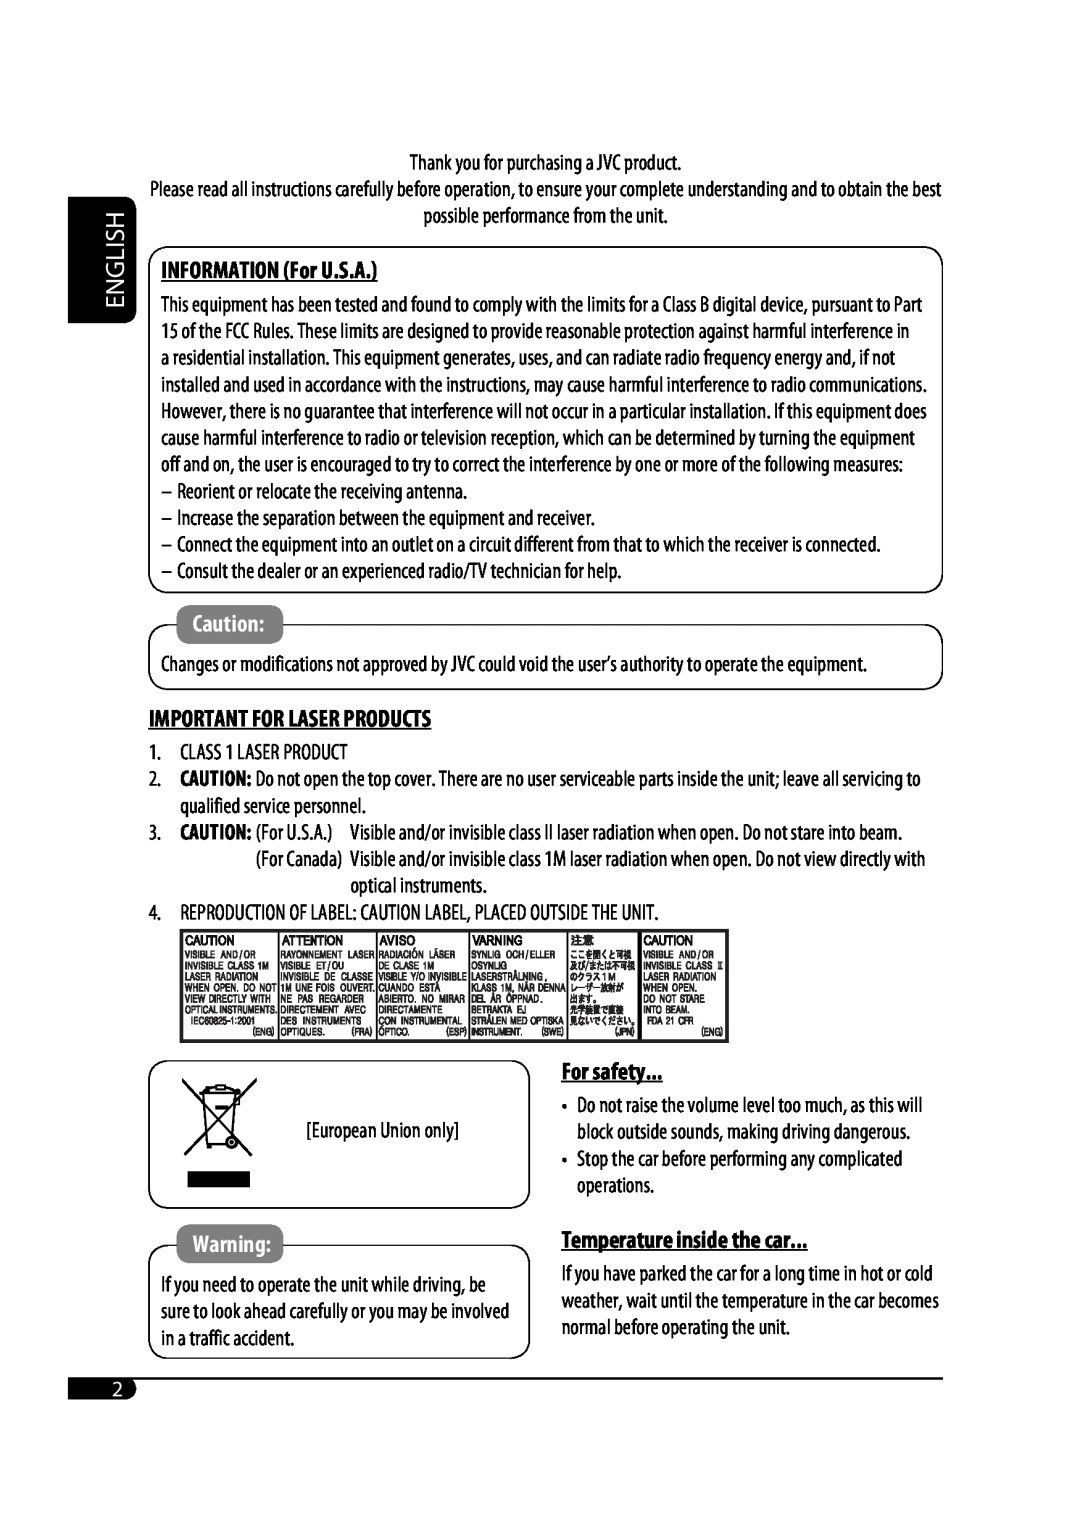 JVC GET0425-001A English, INFORMATION For U.S.A, Important For Laser Products, For safety, Temperature inside the car 